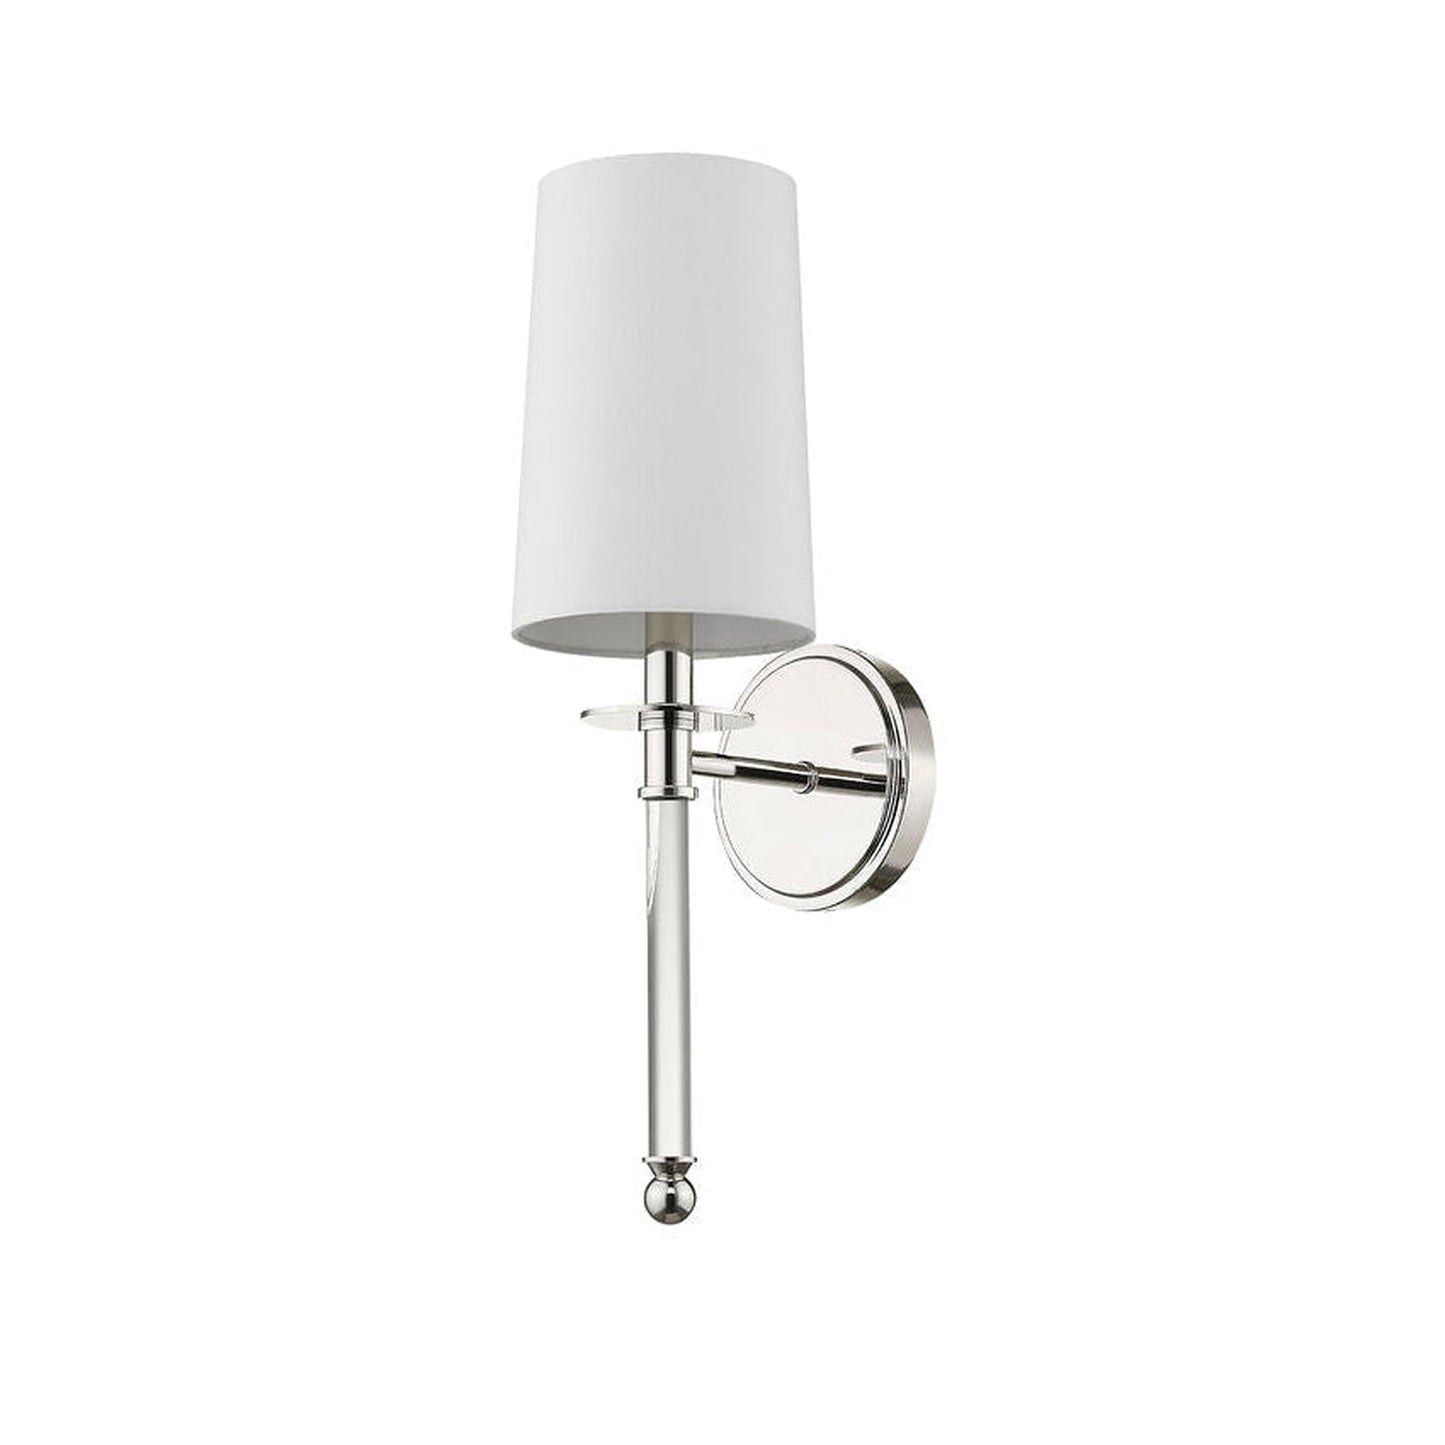 Z-Lite Mila 6" 1-Light Polished Nickel Wall Sconce With White Fabric Shade